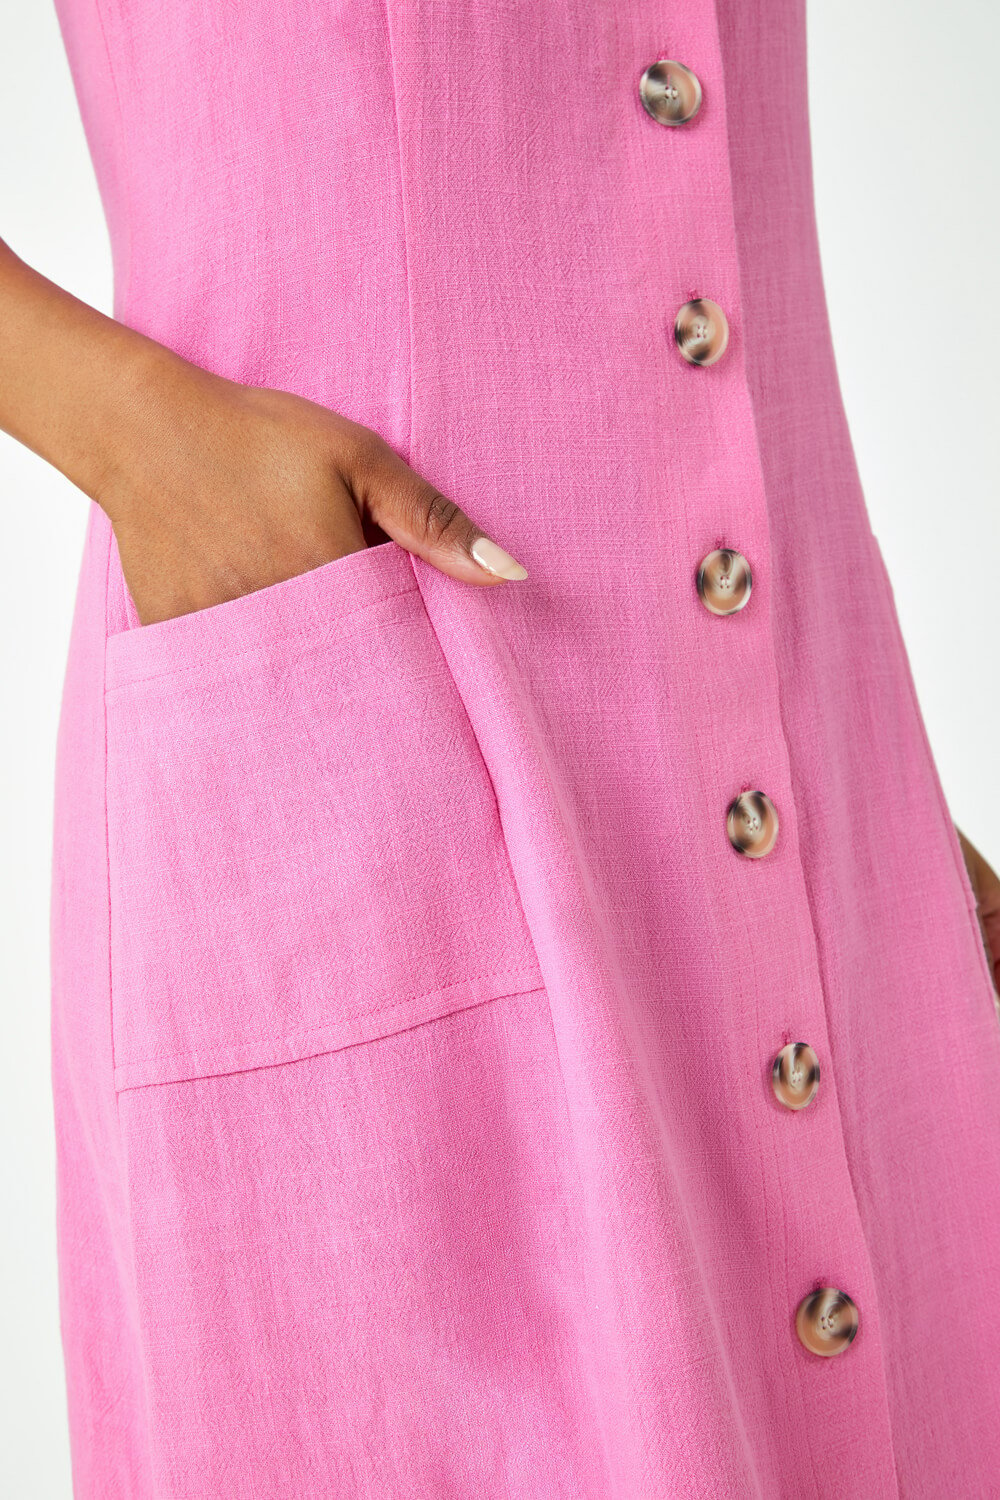 PINK Petite Button Front Pocket Dress , Image 5 of 5